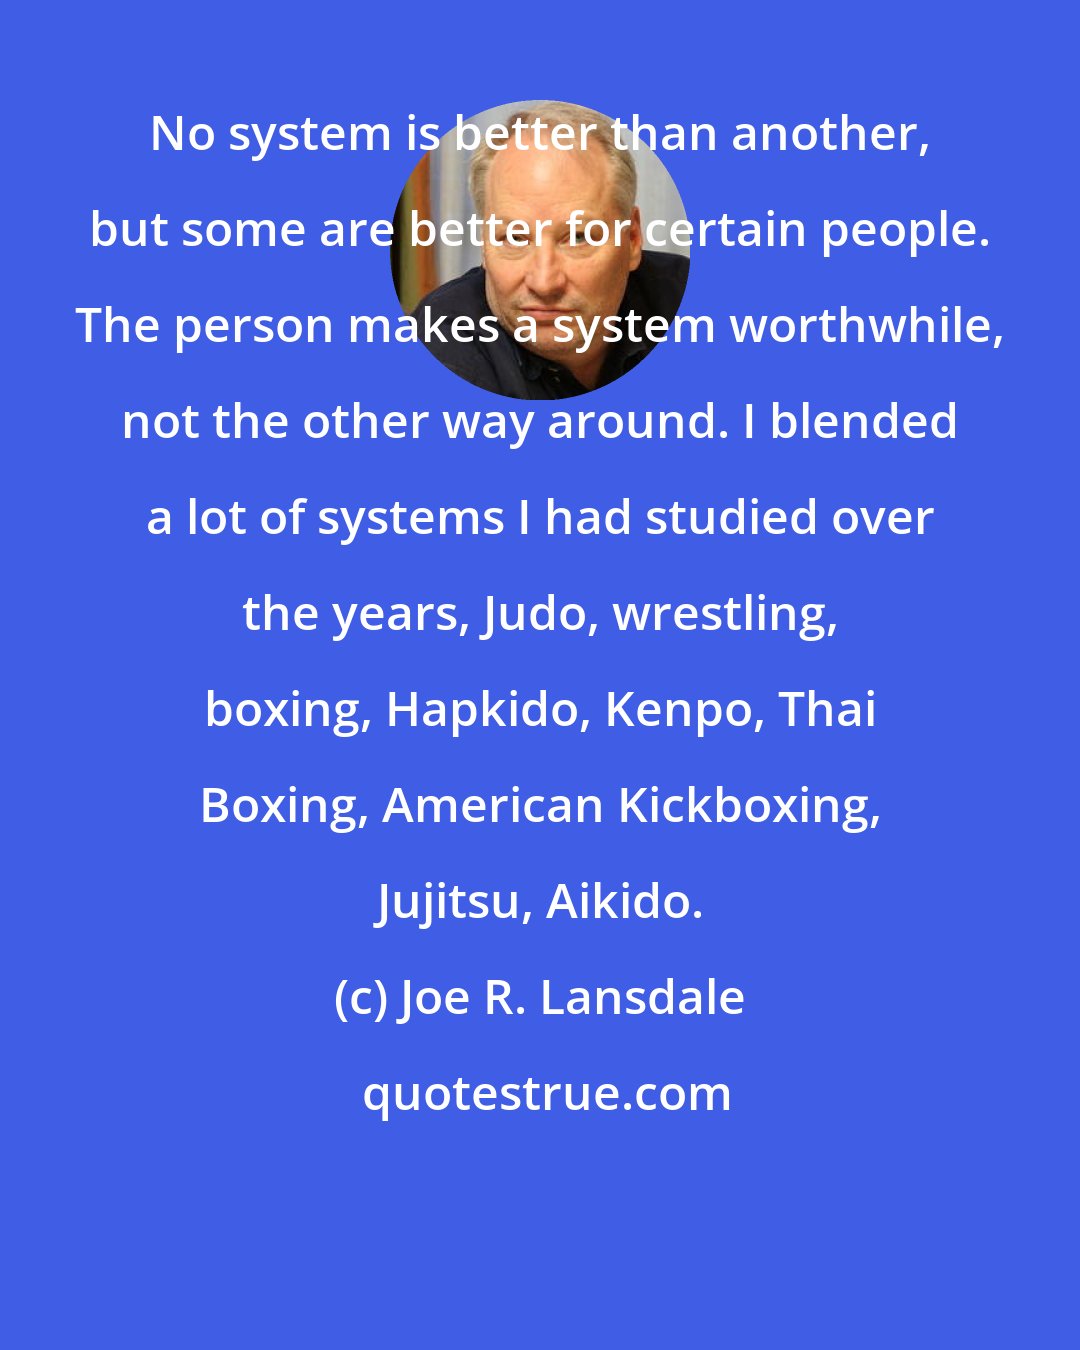 Joe R. Lansdale: No system is better than another, but some are better for certain people. The person makes a system worthwhile, not the other way around. I blended a lot of systems I had studied over the years, Judo, wrestling, boxing, Hapkido, Kenpo, Thai Boxing, American Kickboxing, Jujitsu, Aikido.